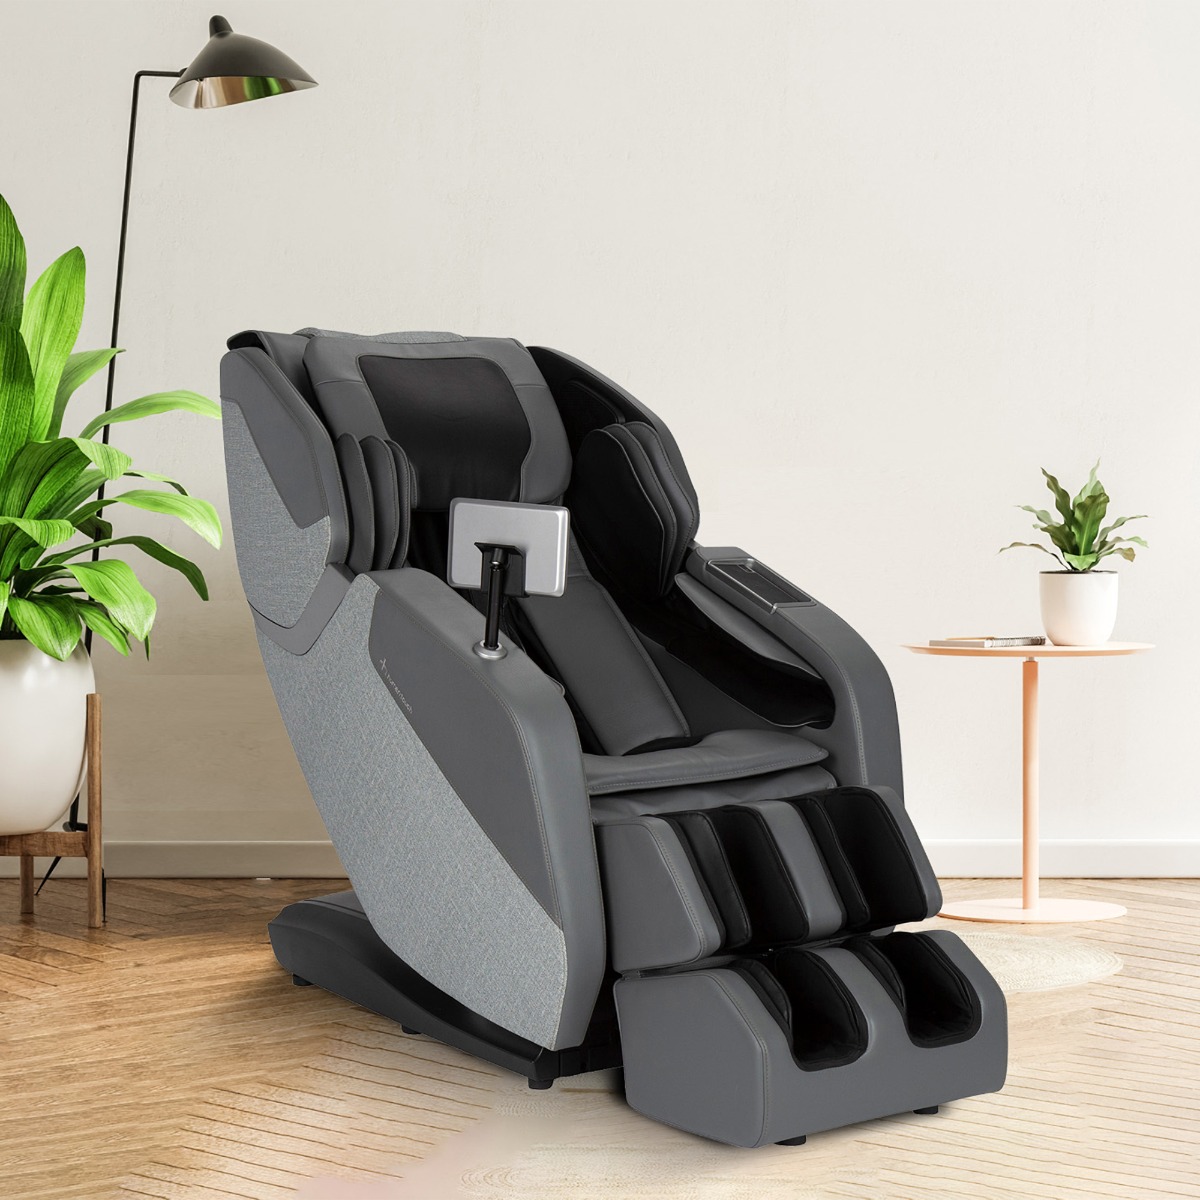 WholeBody ROVE Massage Chair in Slate